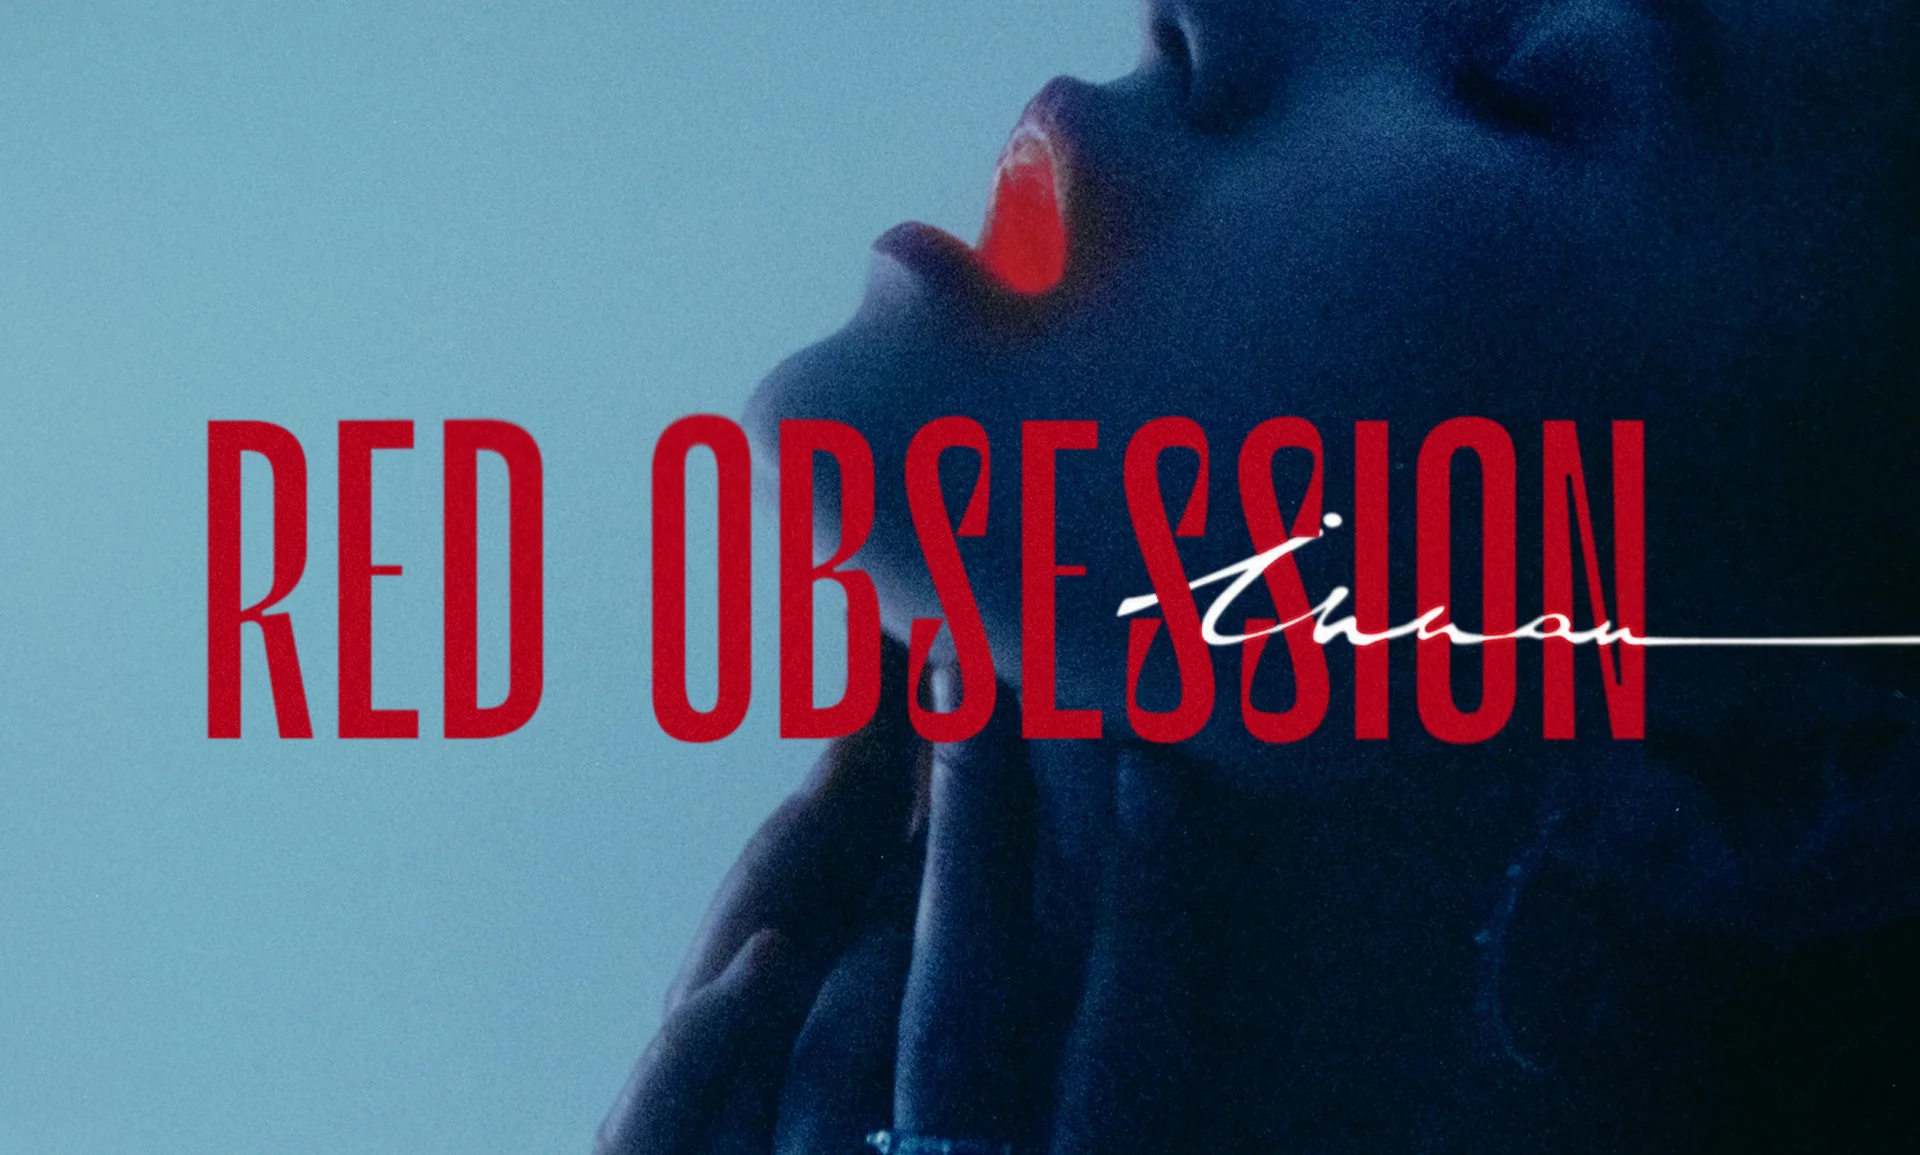 INNAN - Red Obsession on Vimeo